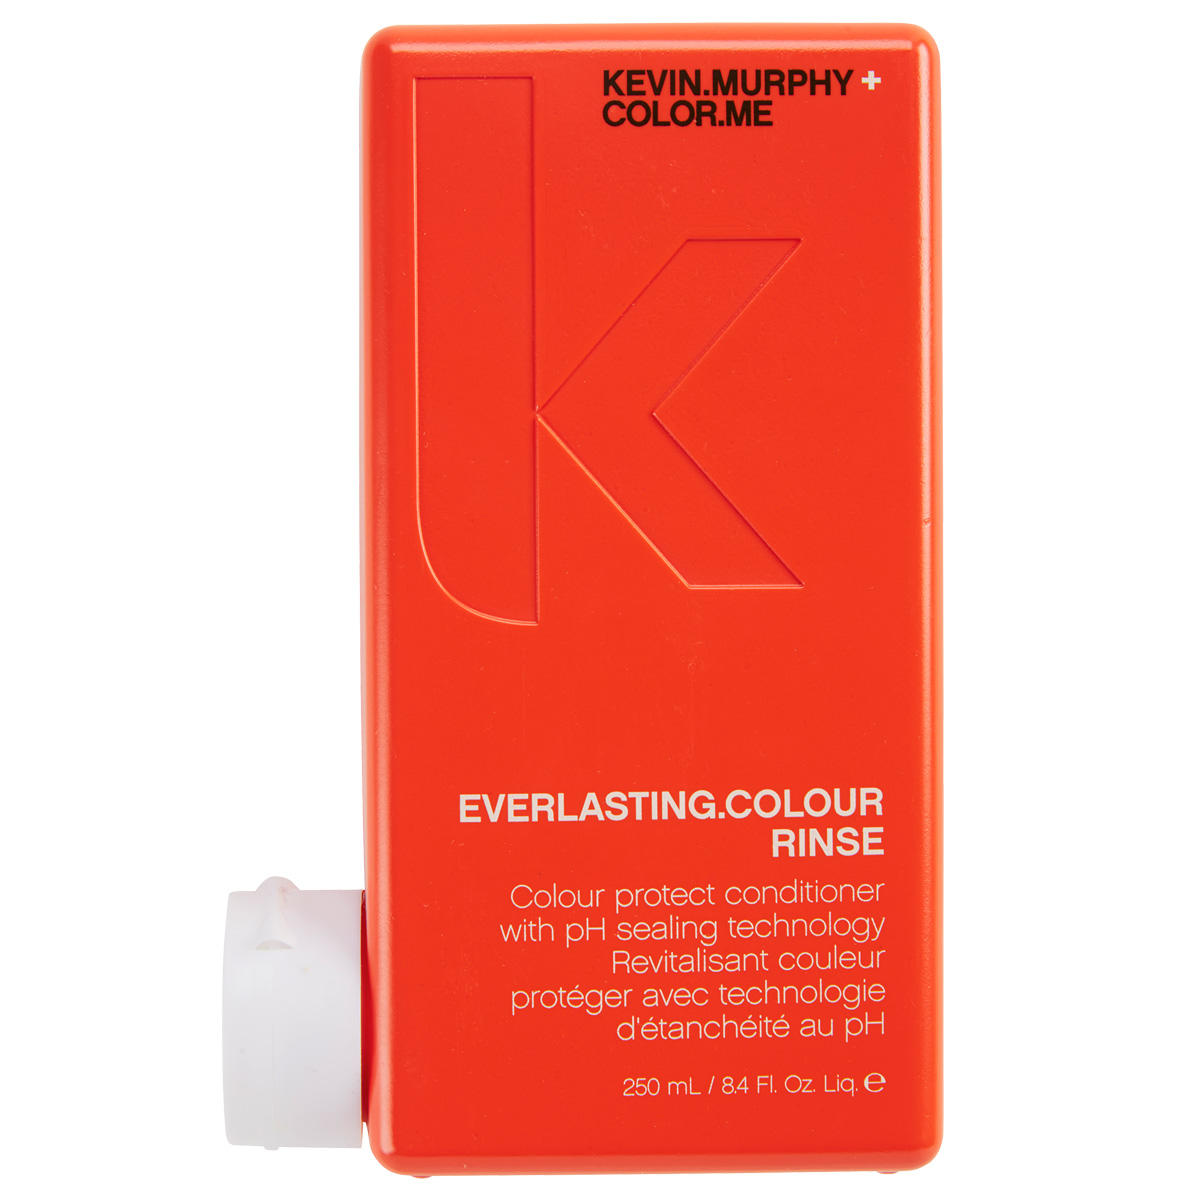 KEVIN.MURPHY EVERLASTING.COLOUR RINSE 250 ml - 1